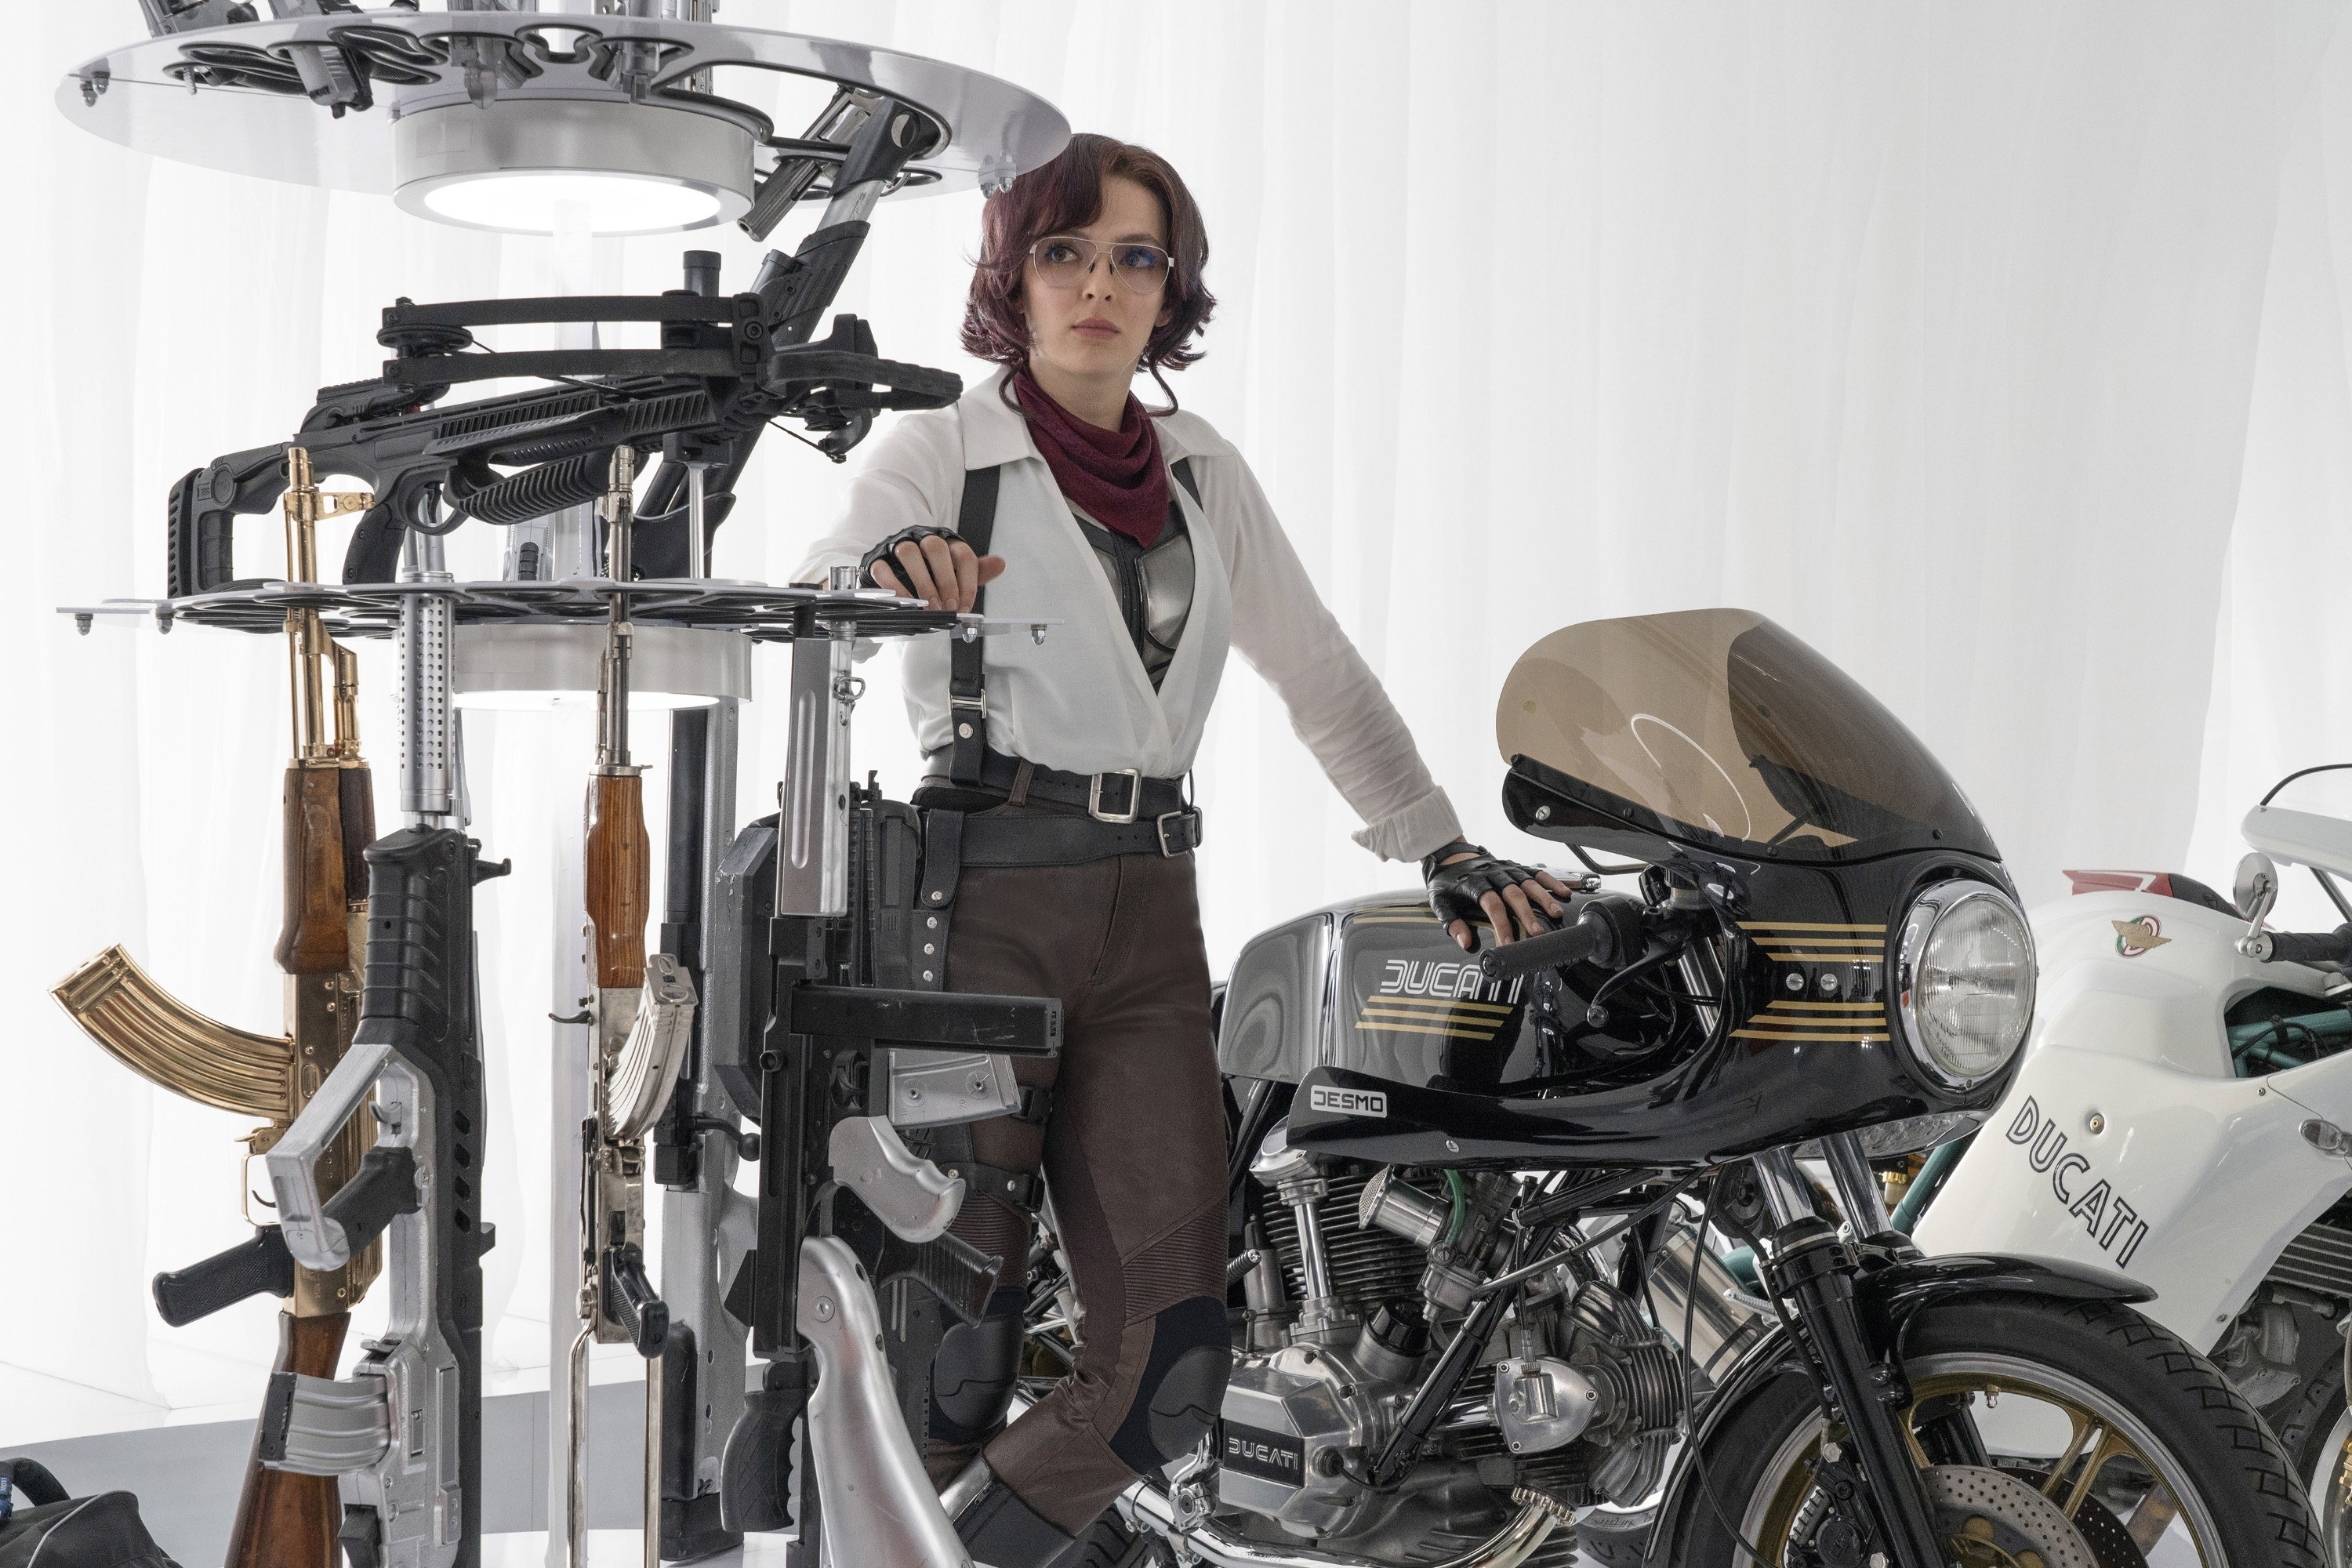 A woman standing in a room full of guns and motorcycles.